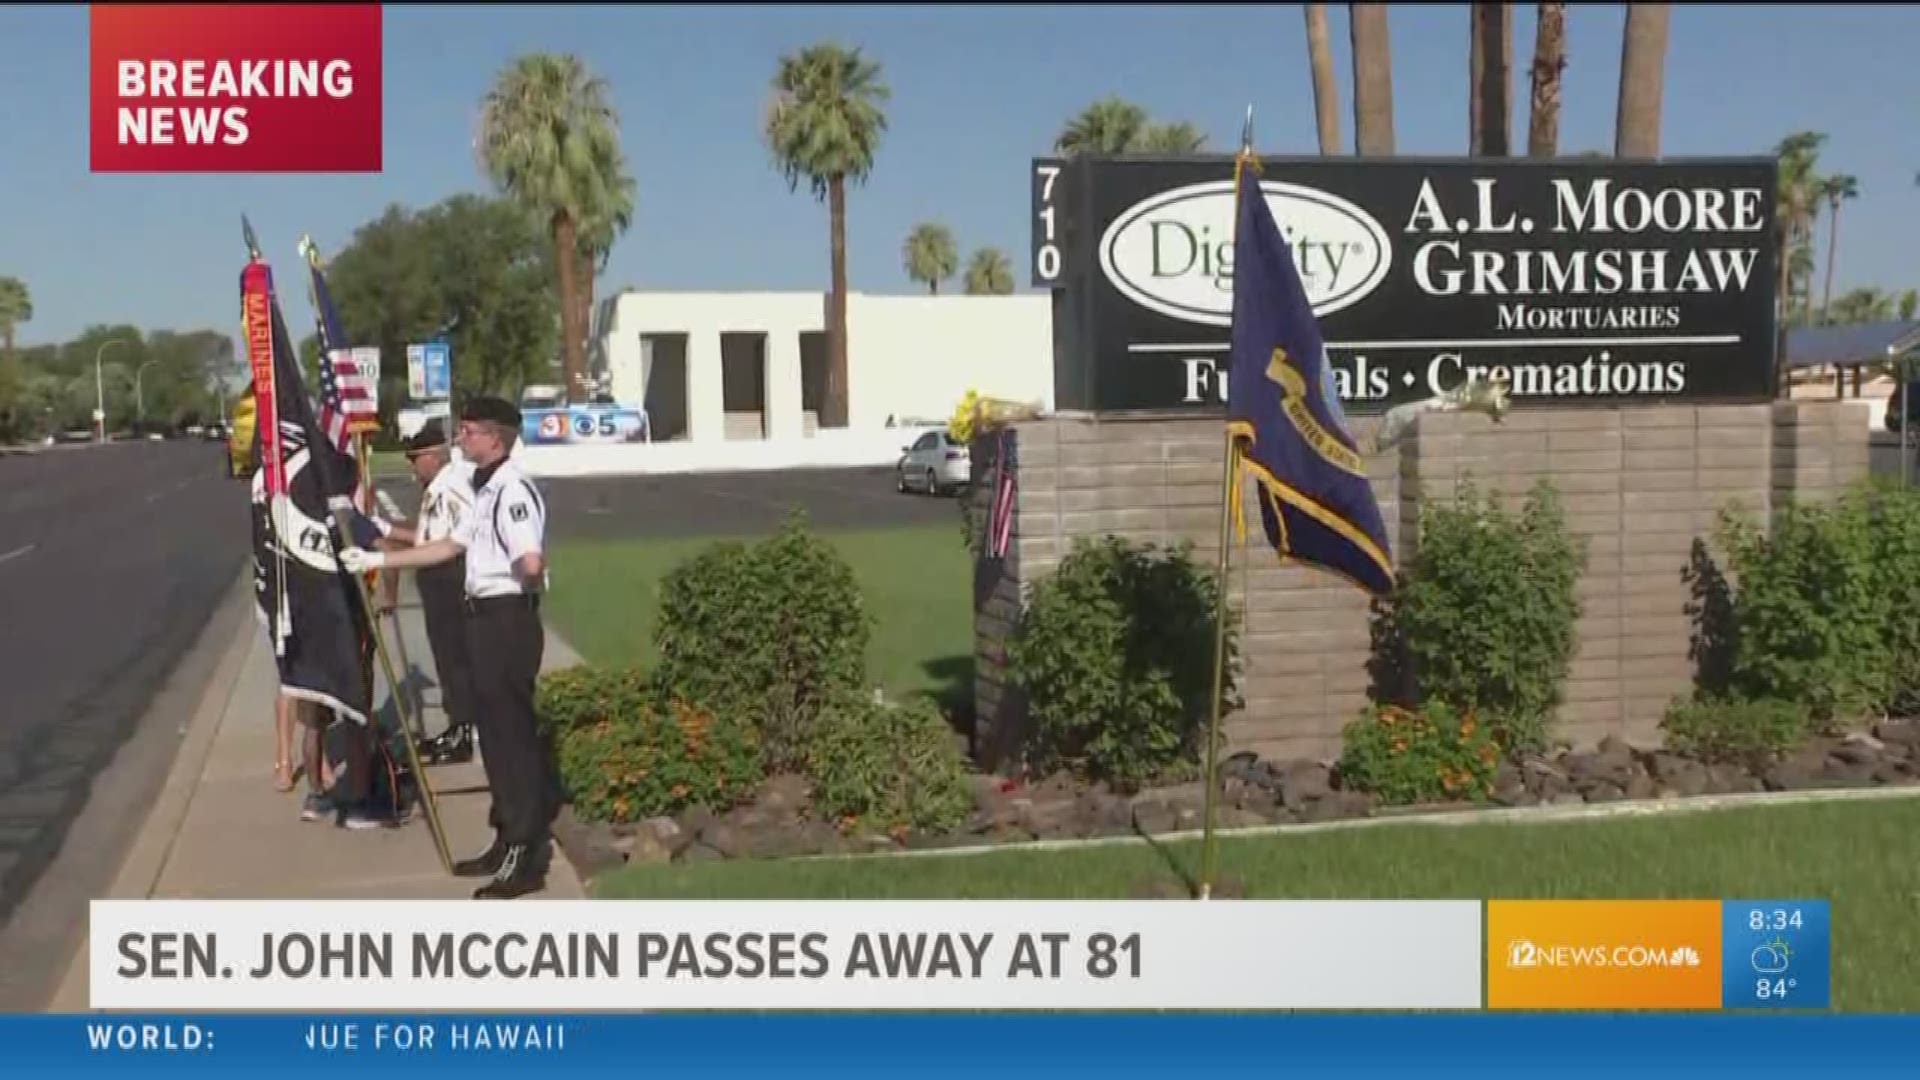 An honor guard will stand at attention outside the Phoenix mortuary as long as it has Sen. John McCain's body. People also lined the roads as the procession carrying his body made its way to Phoenix on Saturday night.